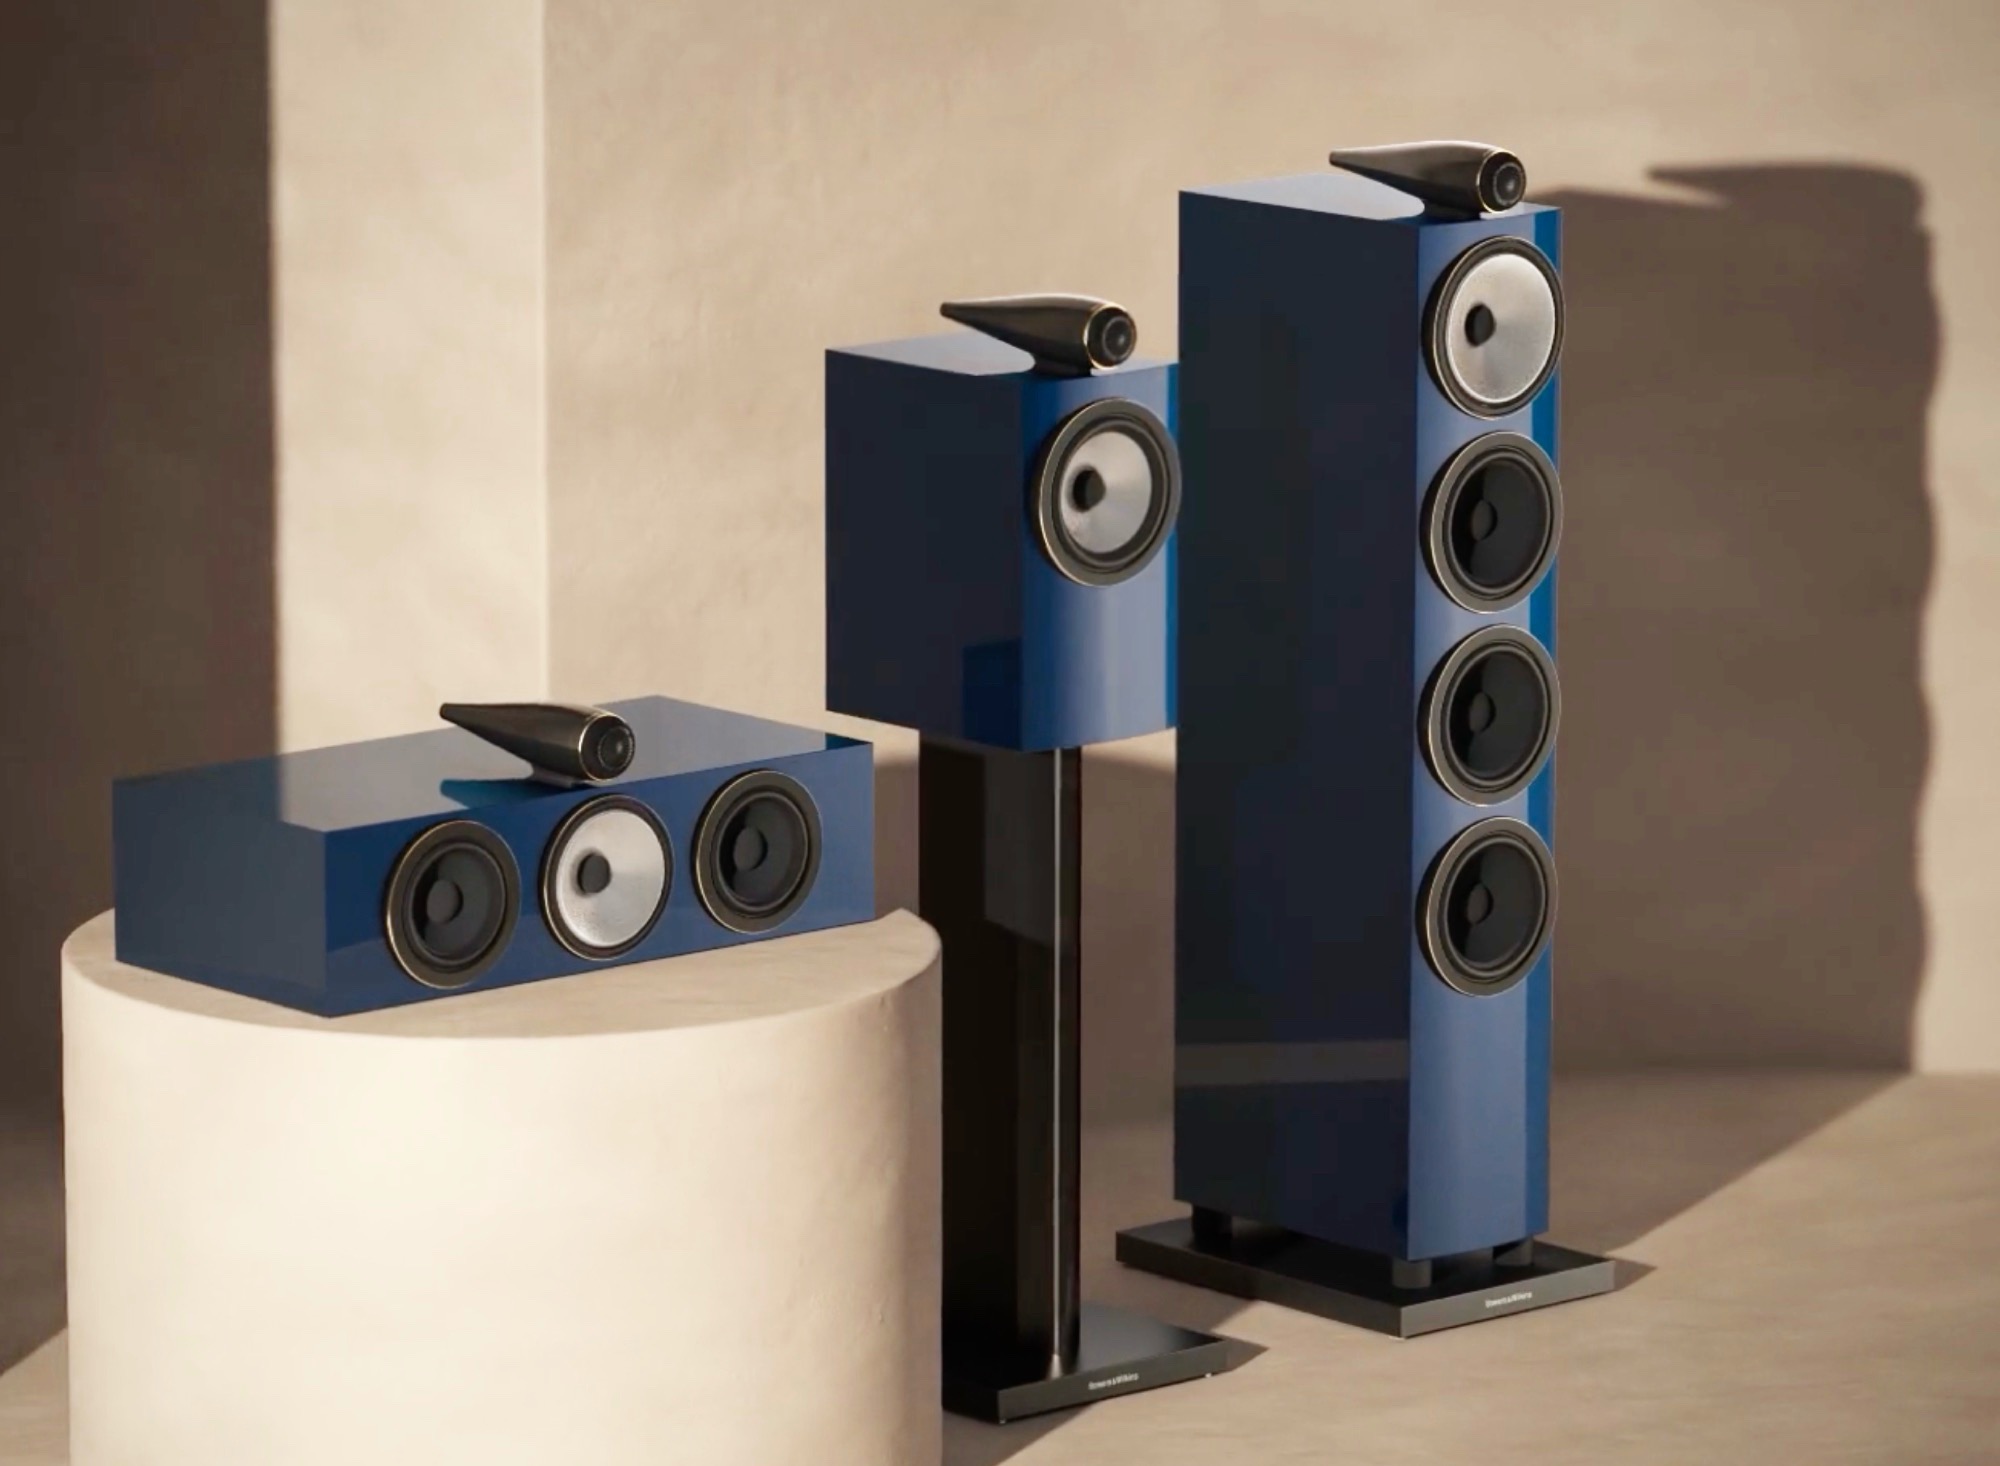 bowers - Wilkins - 700 s3 - signature